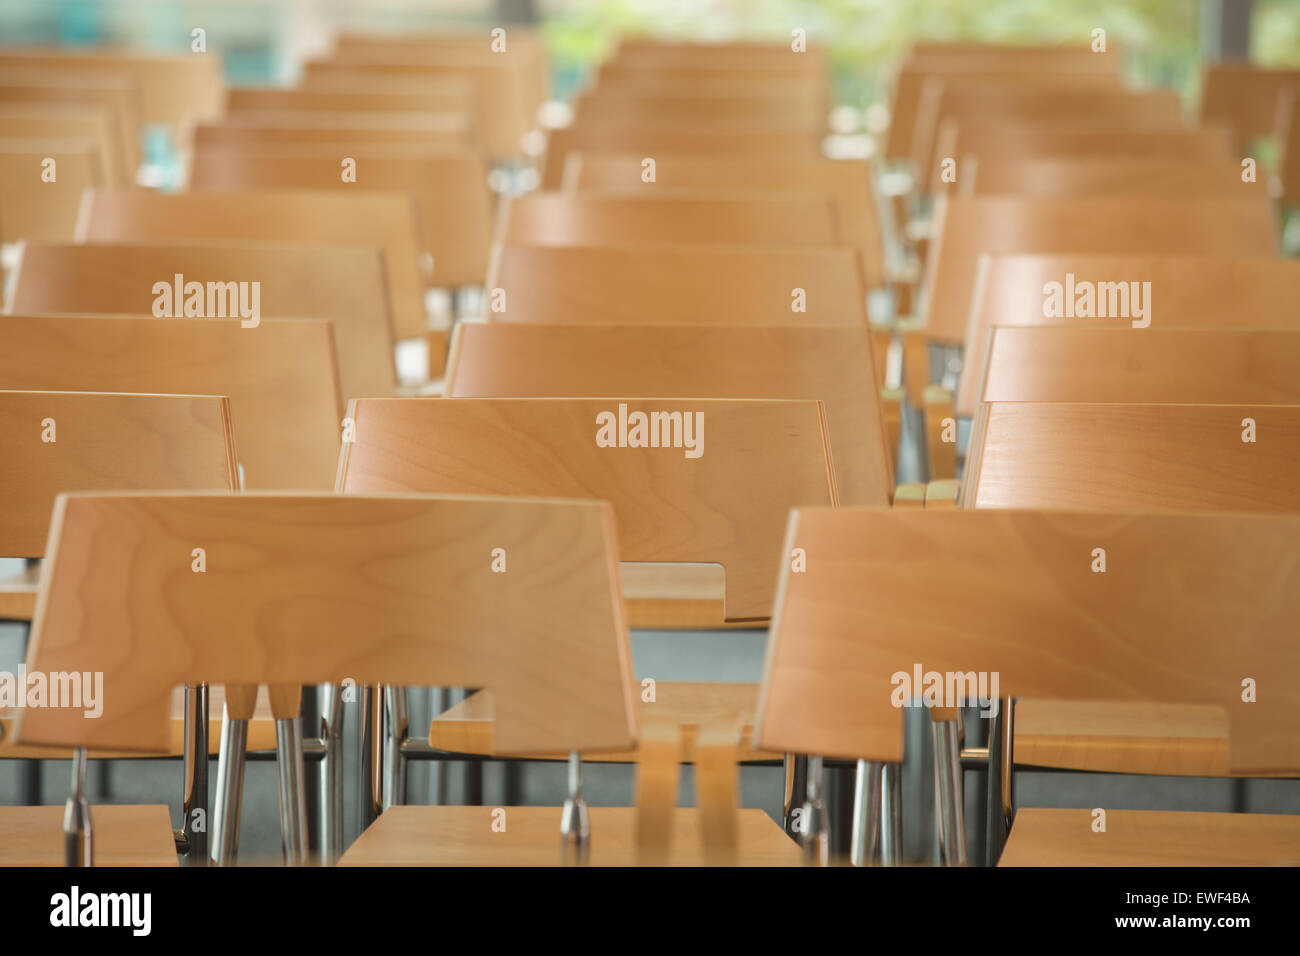 Rows of empty chairs in office Stock Photo